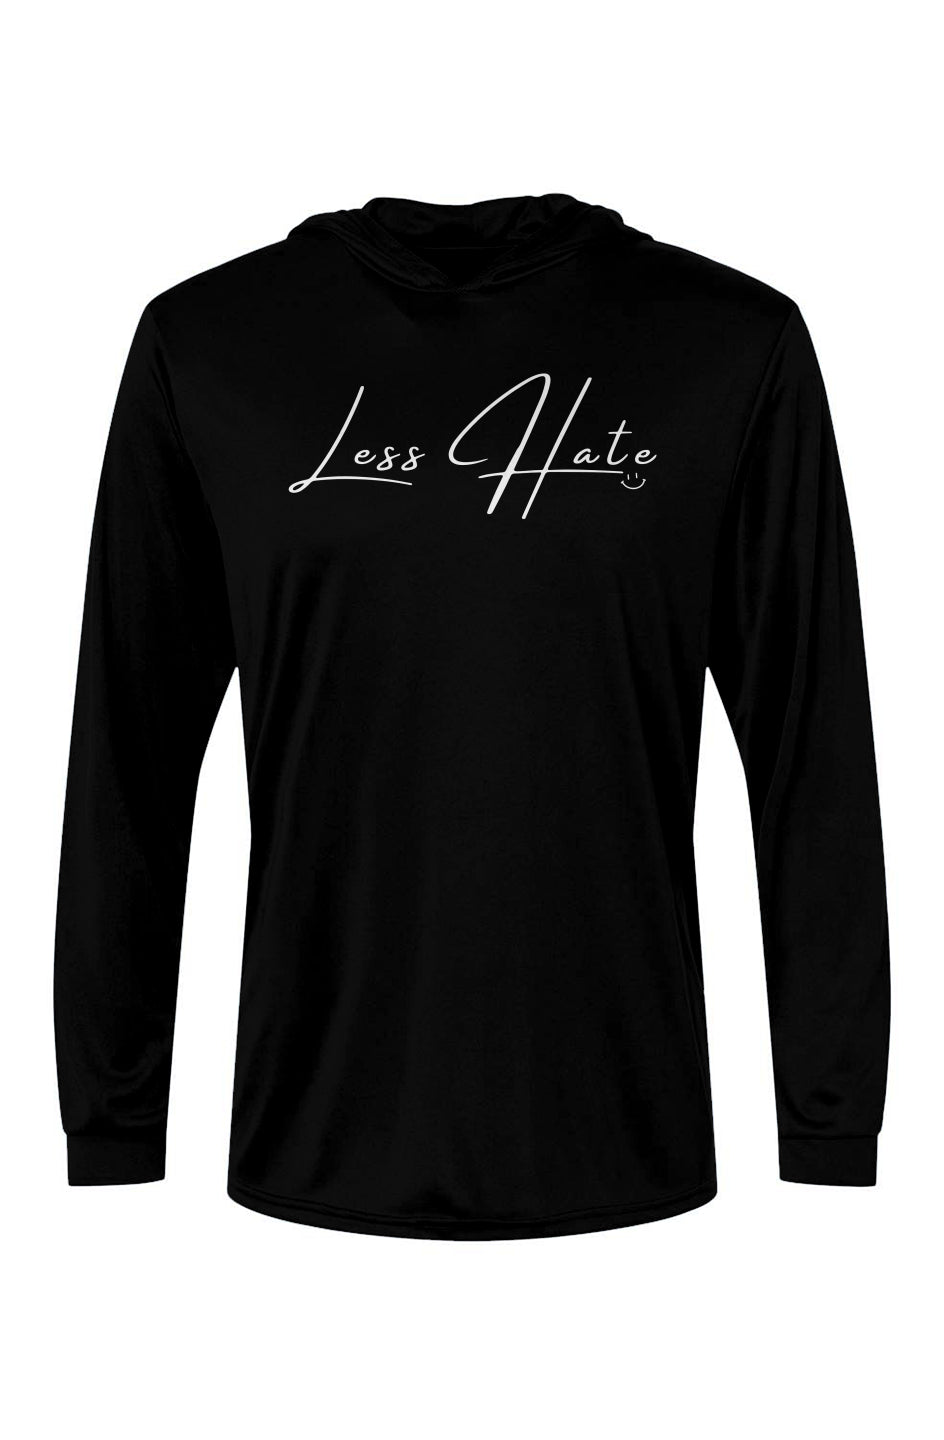 Bahama Upgrade your activewear collection with the Bahama Performance Hooded LS Tee. Crafted from 100% microfiber performance polyester, it seamlessly blends comfort and style. From wrinkle-resistant finesse to UPF 50 protection, this is activewear redefined for the modern adventurer. Shop now and elevate your activewear game! LS Tee less hate